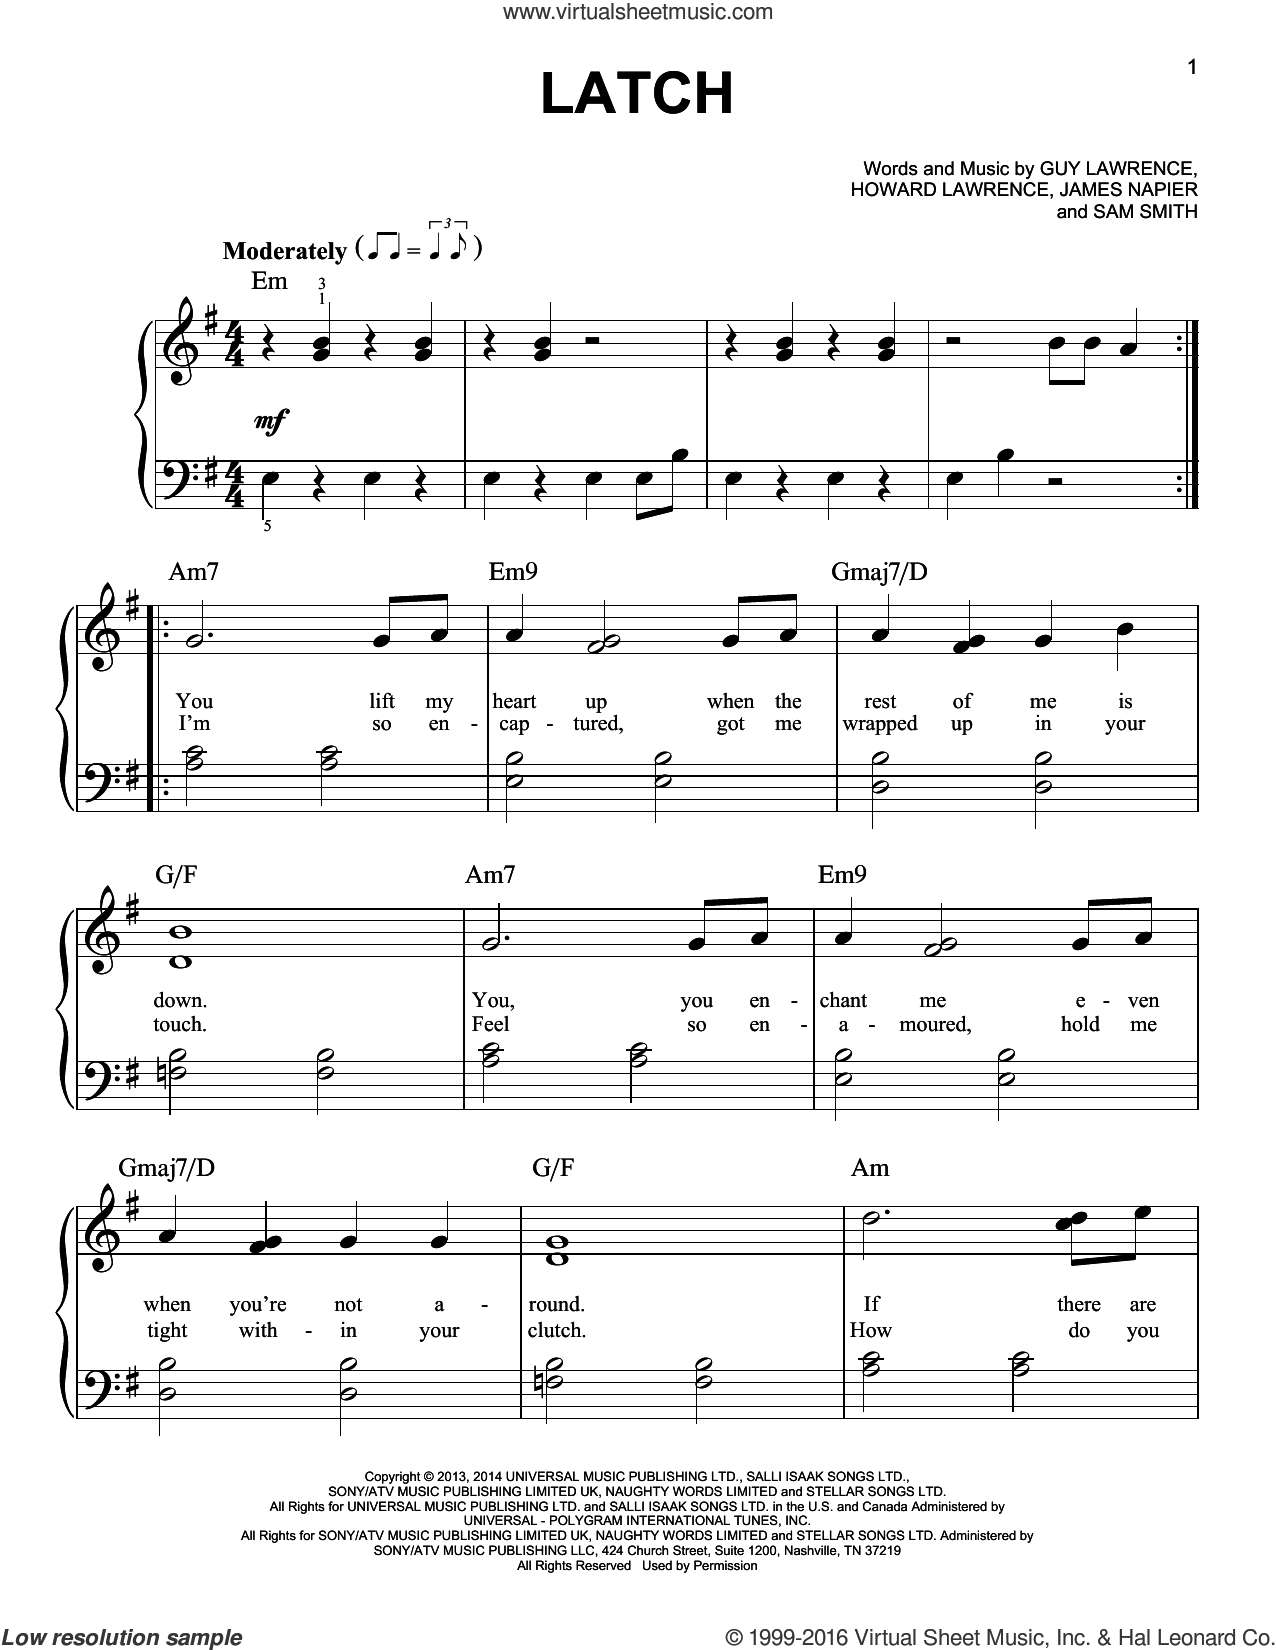 Disclosure featuring Sam Smith: Latch sheet music for piano solo